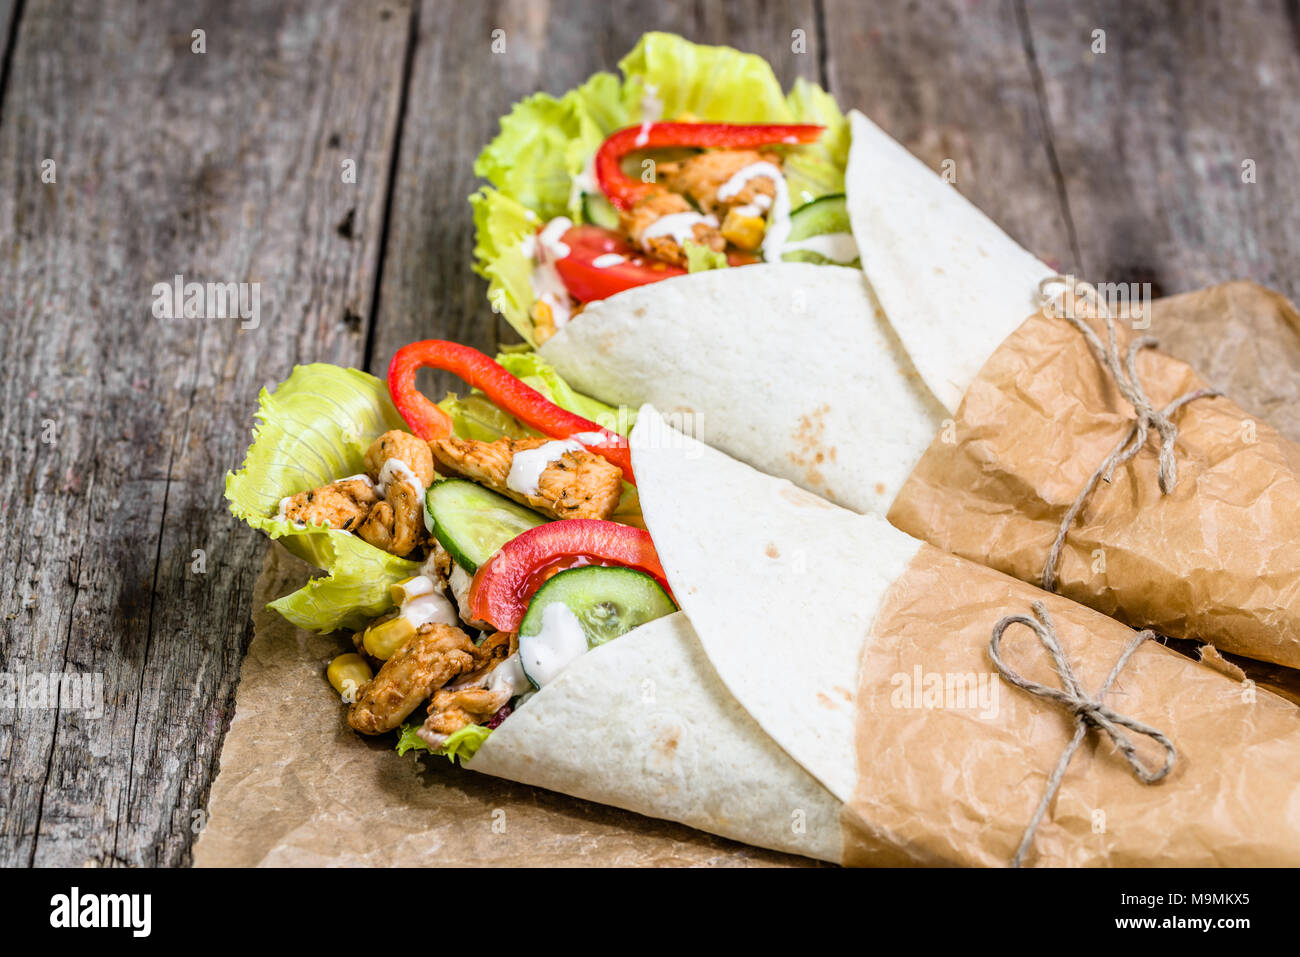 Mexican fajitas, tortilla wraps filled with fresh vegetables and grilled chicken on rustic wooden table Stock Photo